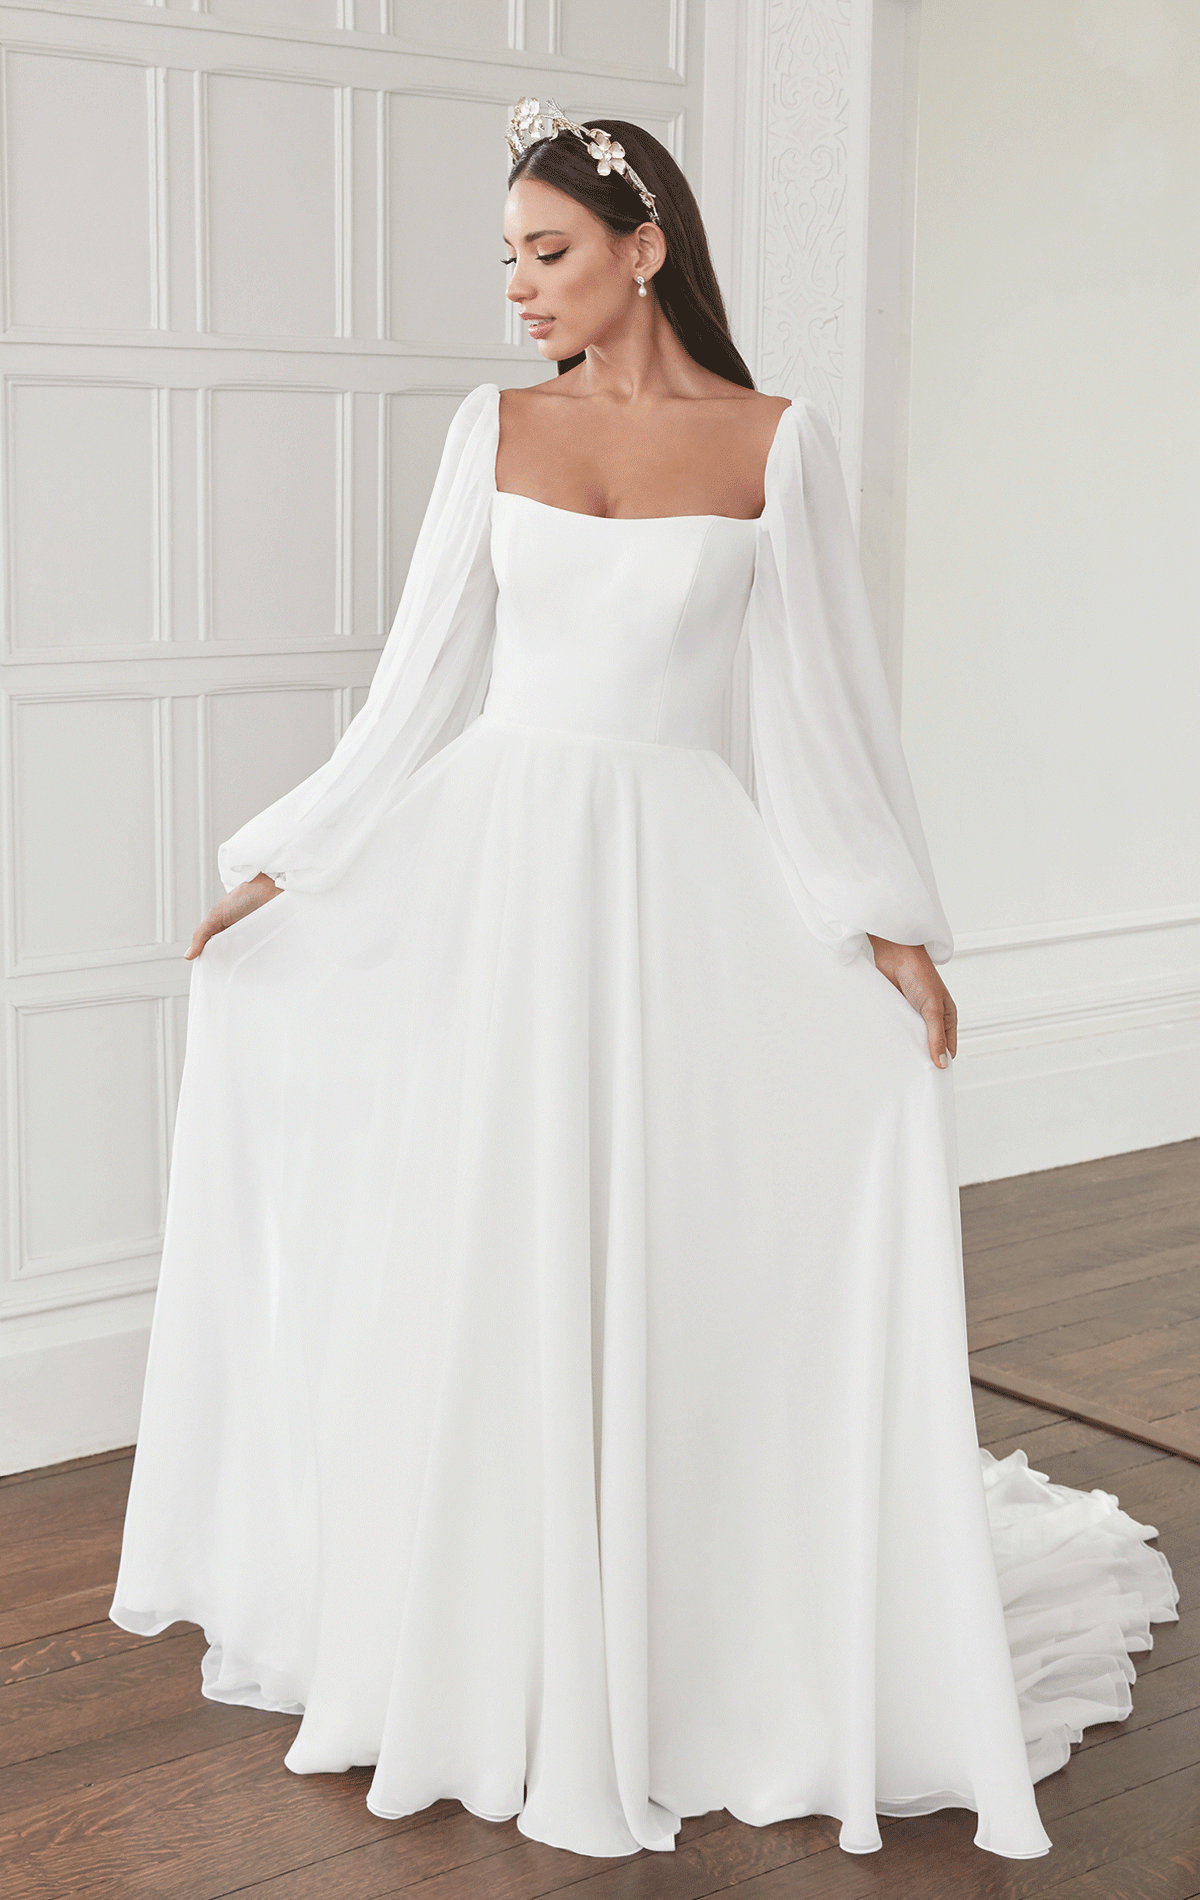 44360 - Eden - Justin Alexander 44360 - From the Sincerity collection this beautiful ethereal design with chiffon sleeves and gentle A-line skirt is a pure classic - Modern & simple wedding dress designs at Blessings of Brighton - Loyal Parade, Mill Rise, Westdene, Brighton BN1 5GG T:01273 505766 E:info@blessingsbridal.co.uk